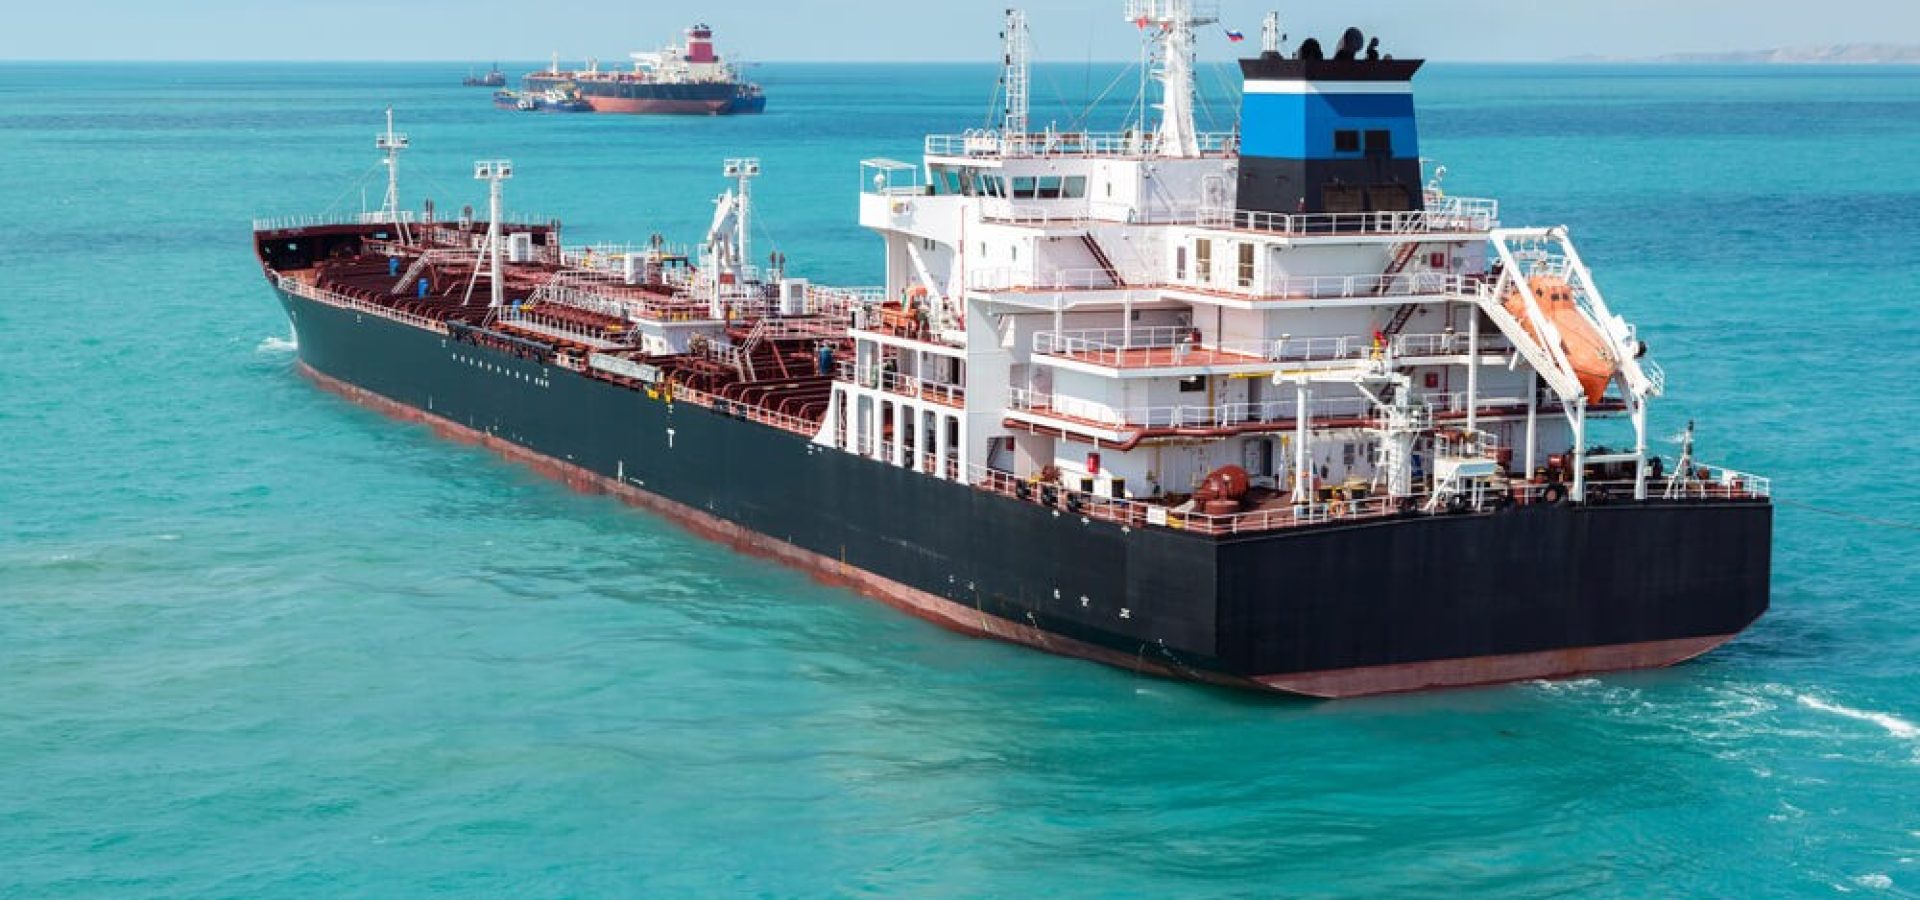 Petroleum Products: Oil product tanker.